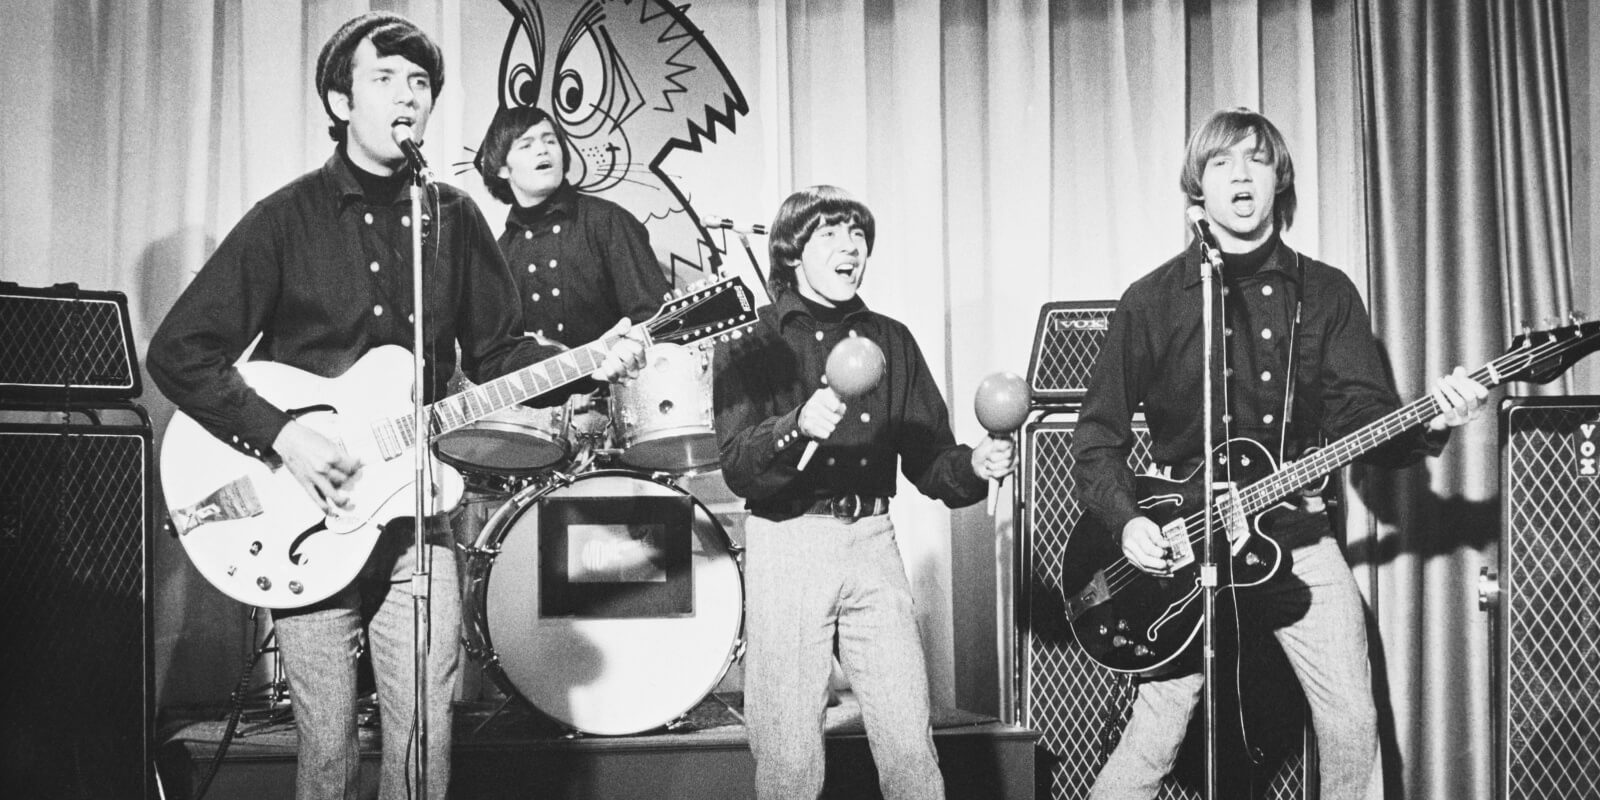 The Monkees' Micky Dolenz along with Mike Nesmith, Davy Jones and Peter Tork on the set of their television show.